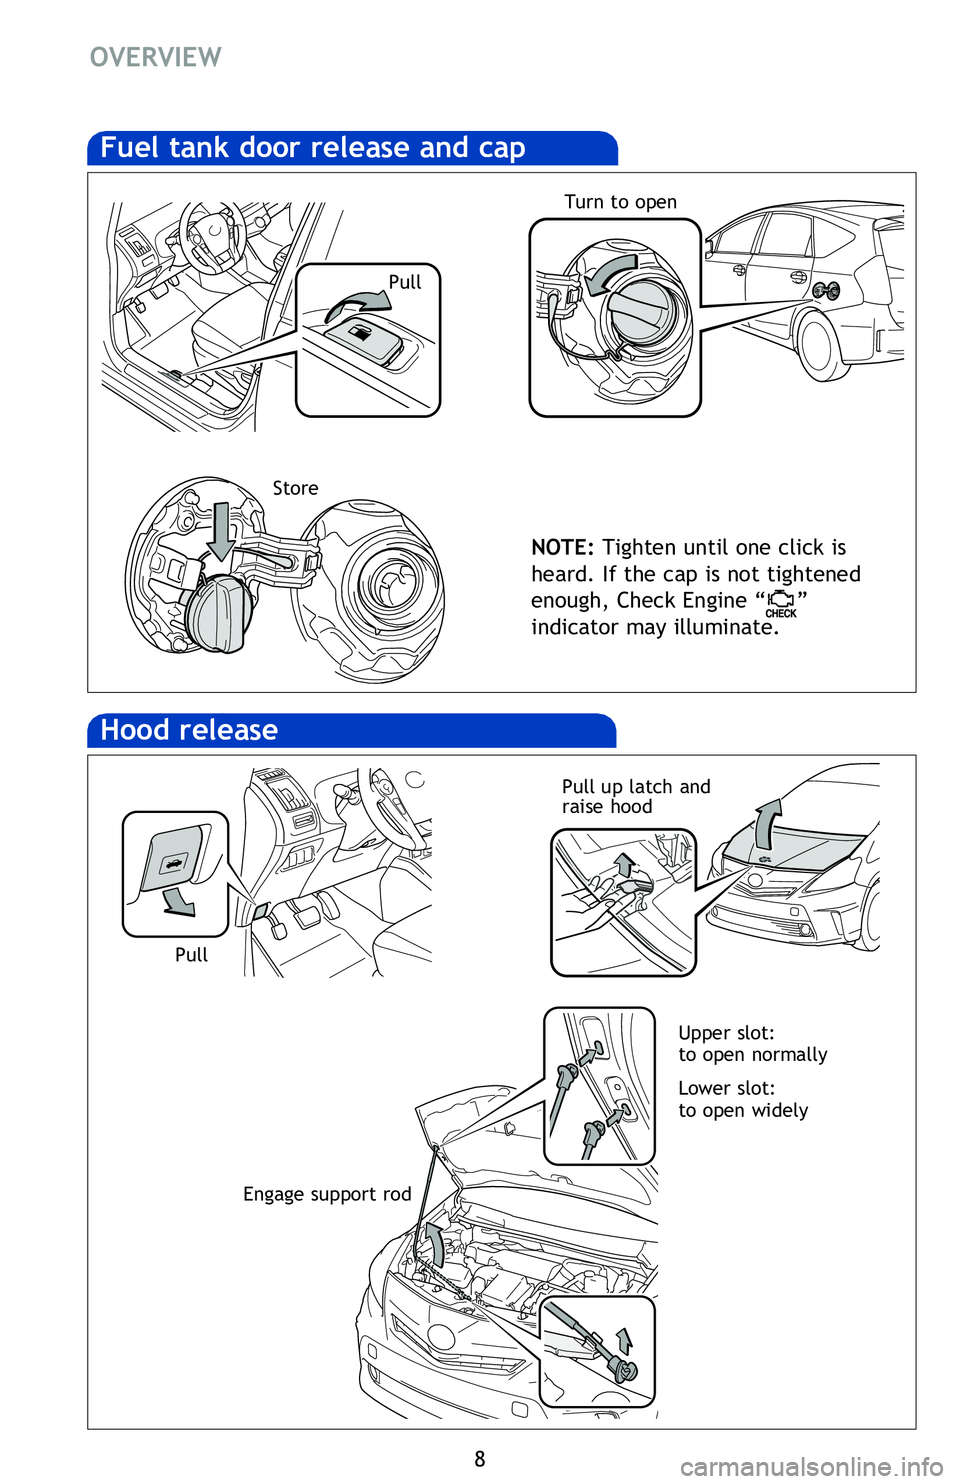 TOYOTA PRIUS V 2013  Owners Manual (in English) 8
OVERVIEW
Hood release
Pull up latch and  
raise hood
Fuel tank door release and cap
NOTE: Tighten until one click is 
heard.  If the cap is not tightened 
enough, Check Engine “
” 
indicator may